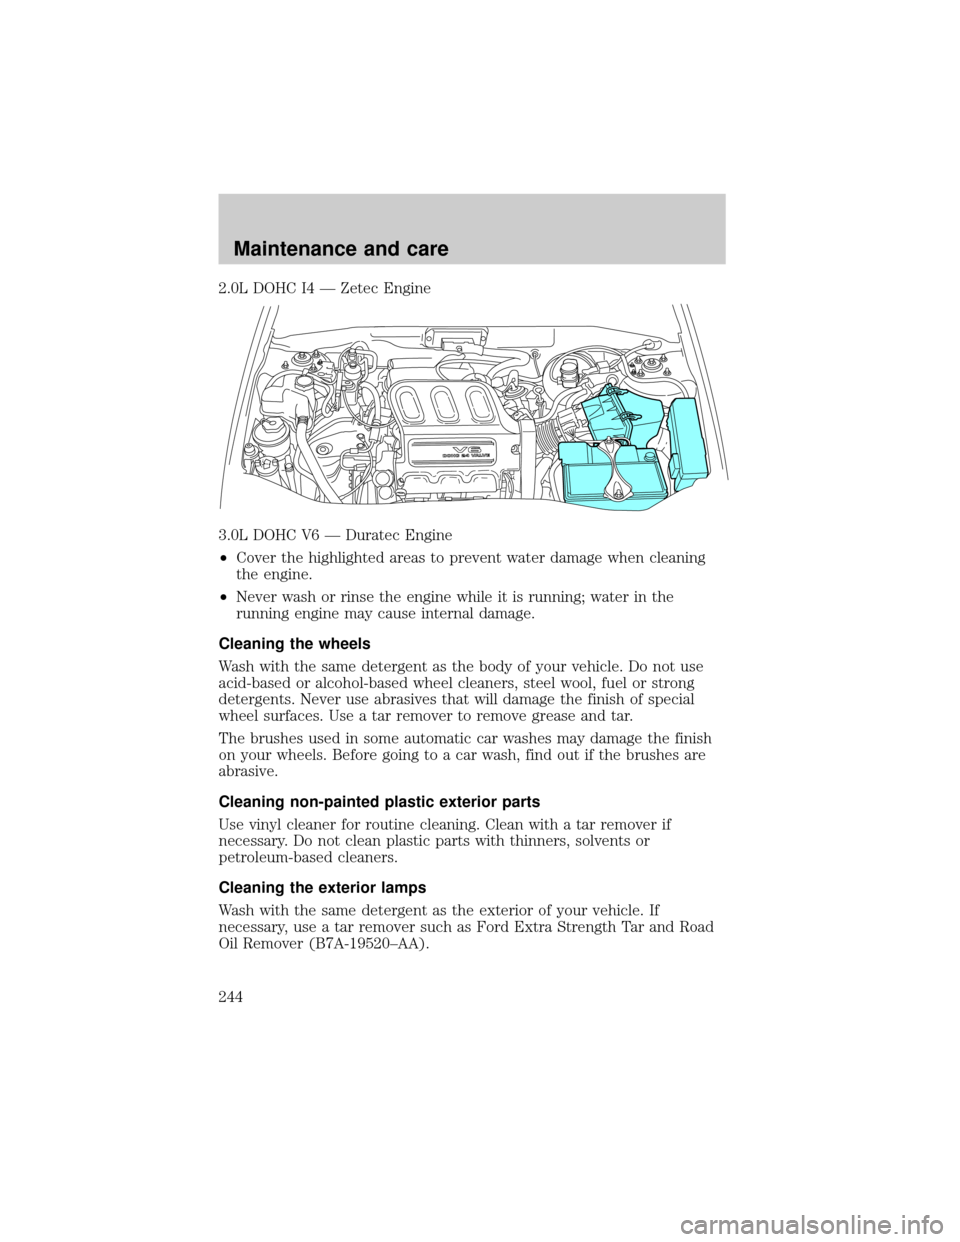 FORD ESCAPE 2001 1.G User Guide 2.0L DOHC I4 Ð Zetec Engine
3.0L DOHC V6 Ð Duratec Engine
²Cover the highlighted areas to prevent water damage when cleaning
the engine.
²Never wash or rinse the engine while it is running; water 